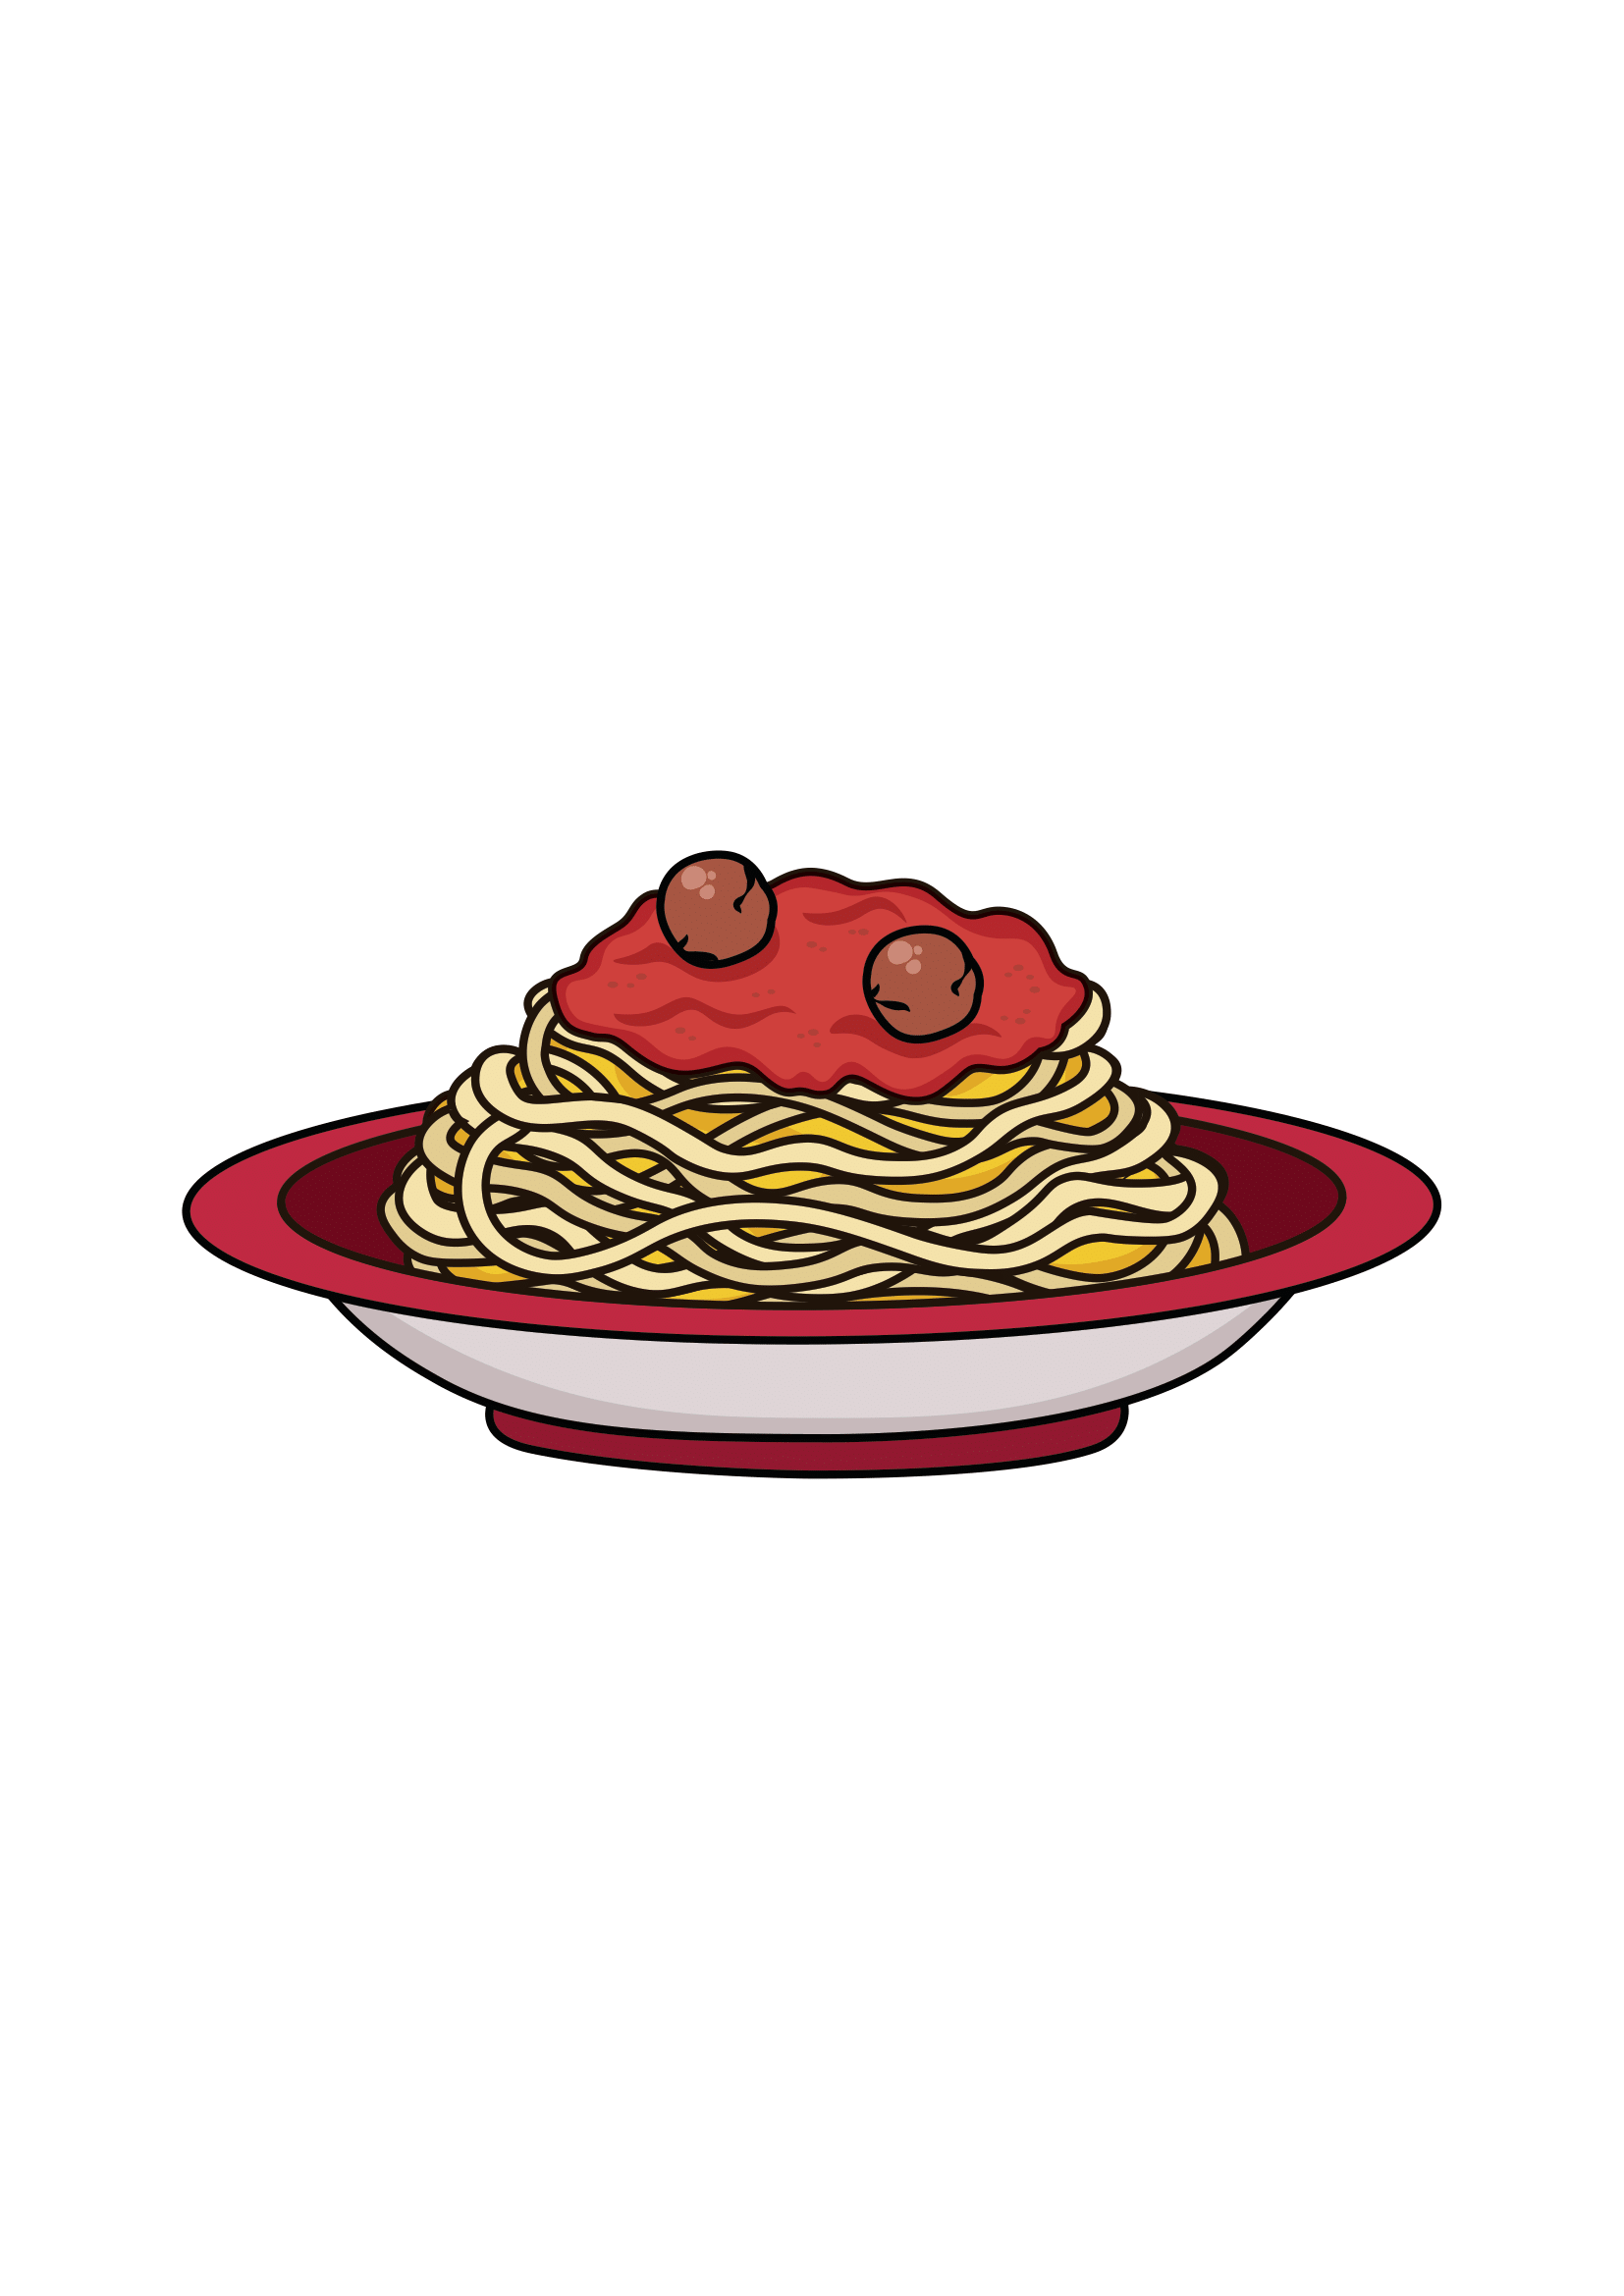 How to Draw Spaghetti And Meatballs Step by Step